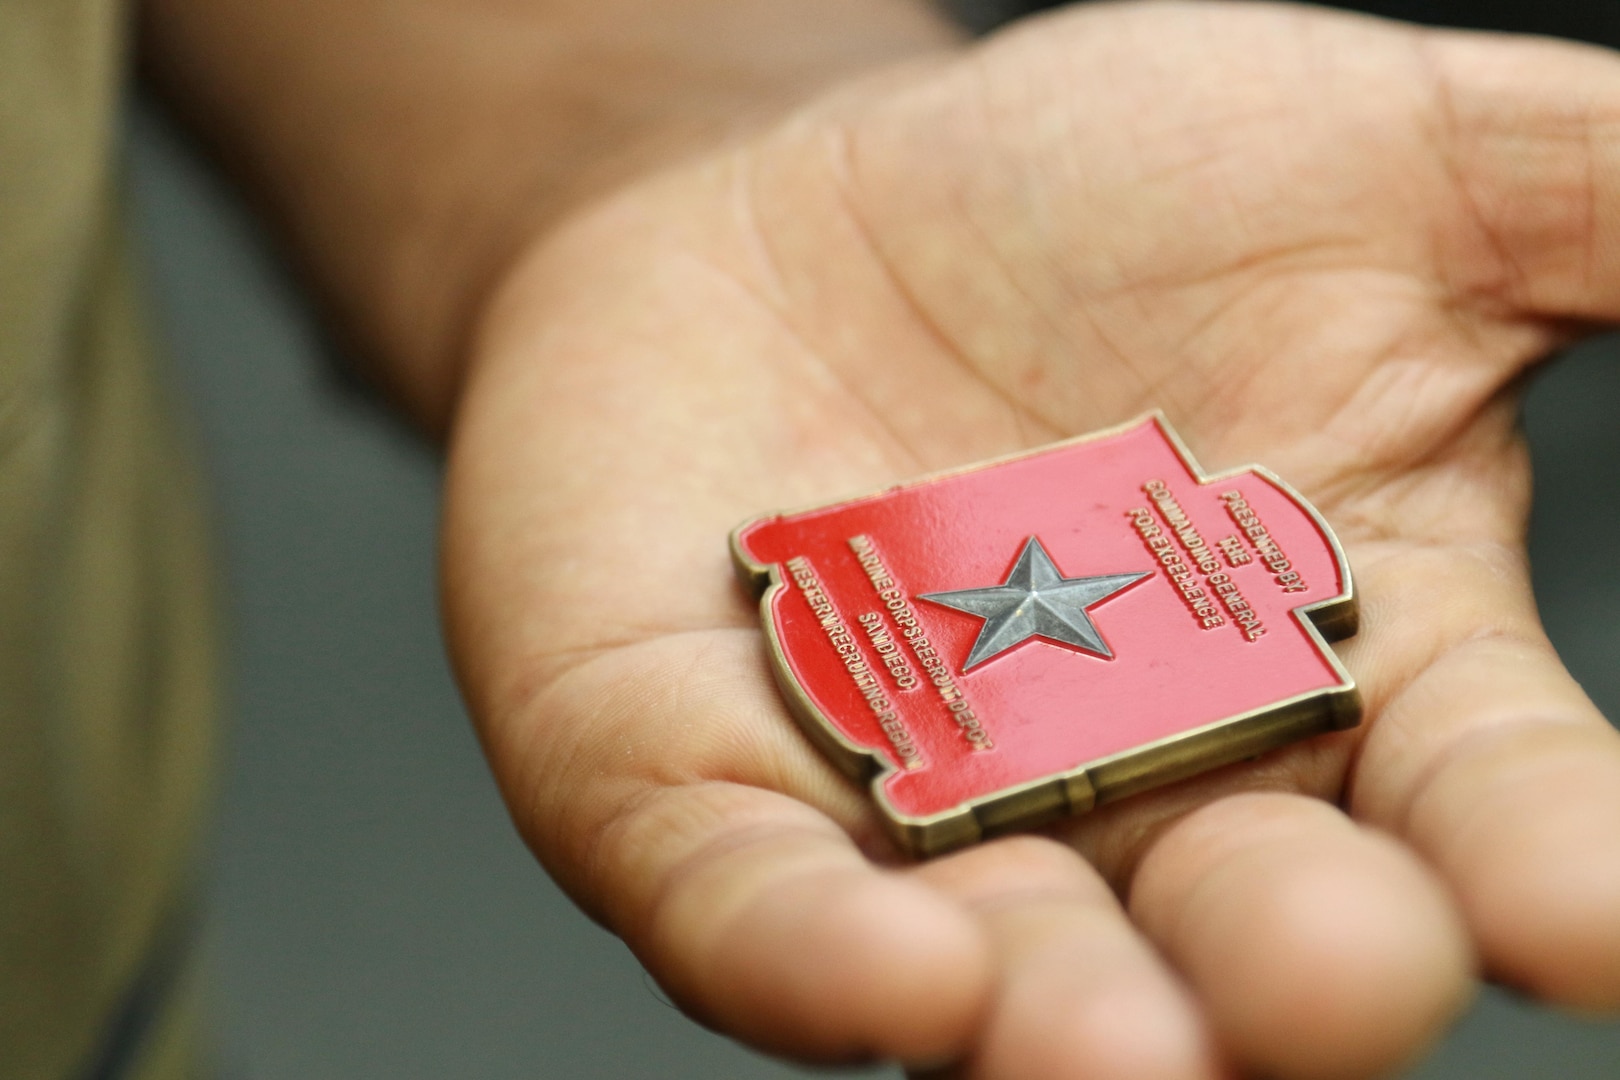 vt. Mohammad Nadir holds a challenge coin given to him by Marine Corps Gen. William Jurney, commanding general for Western Recruiting Region, Marine Corps Recruiting Command, June 1, 2017. Nadir graduated from recruit training on May 26, 2017, and will train to become an infantryman. Nadir moved to the United States in 2014 with a Special Immigrant Visa after working for three years as an interpreter with the International Security Assistance Force in the Sangin District of Helmand province, Afghanistan. (U.S. Marine Corps photo by Sgt. Jessica Quezada)